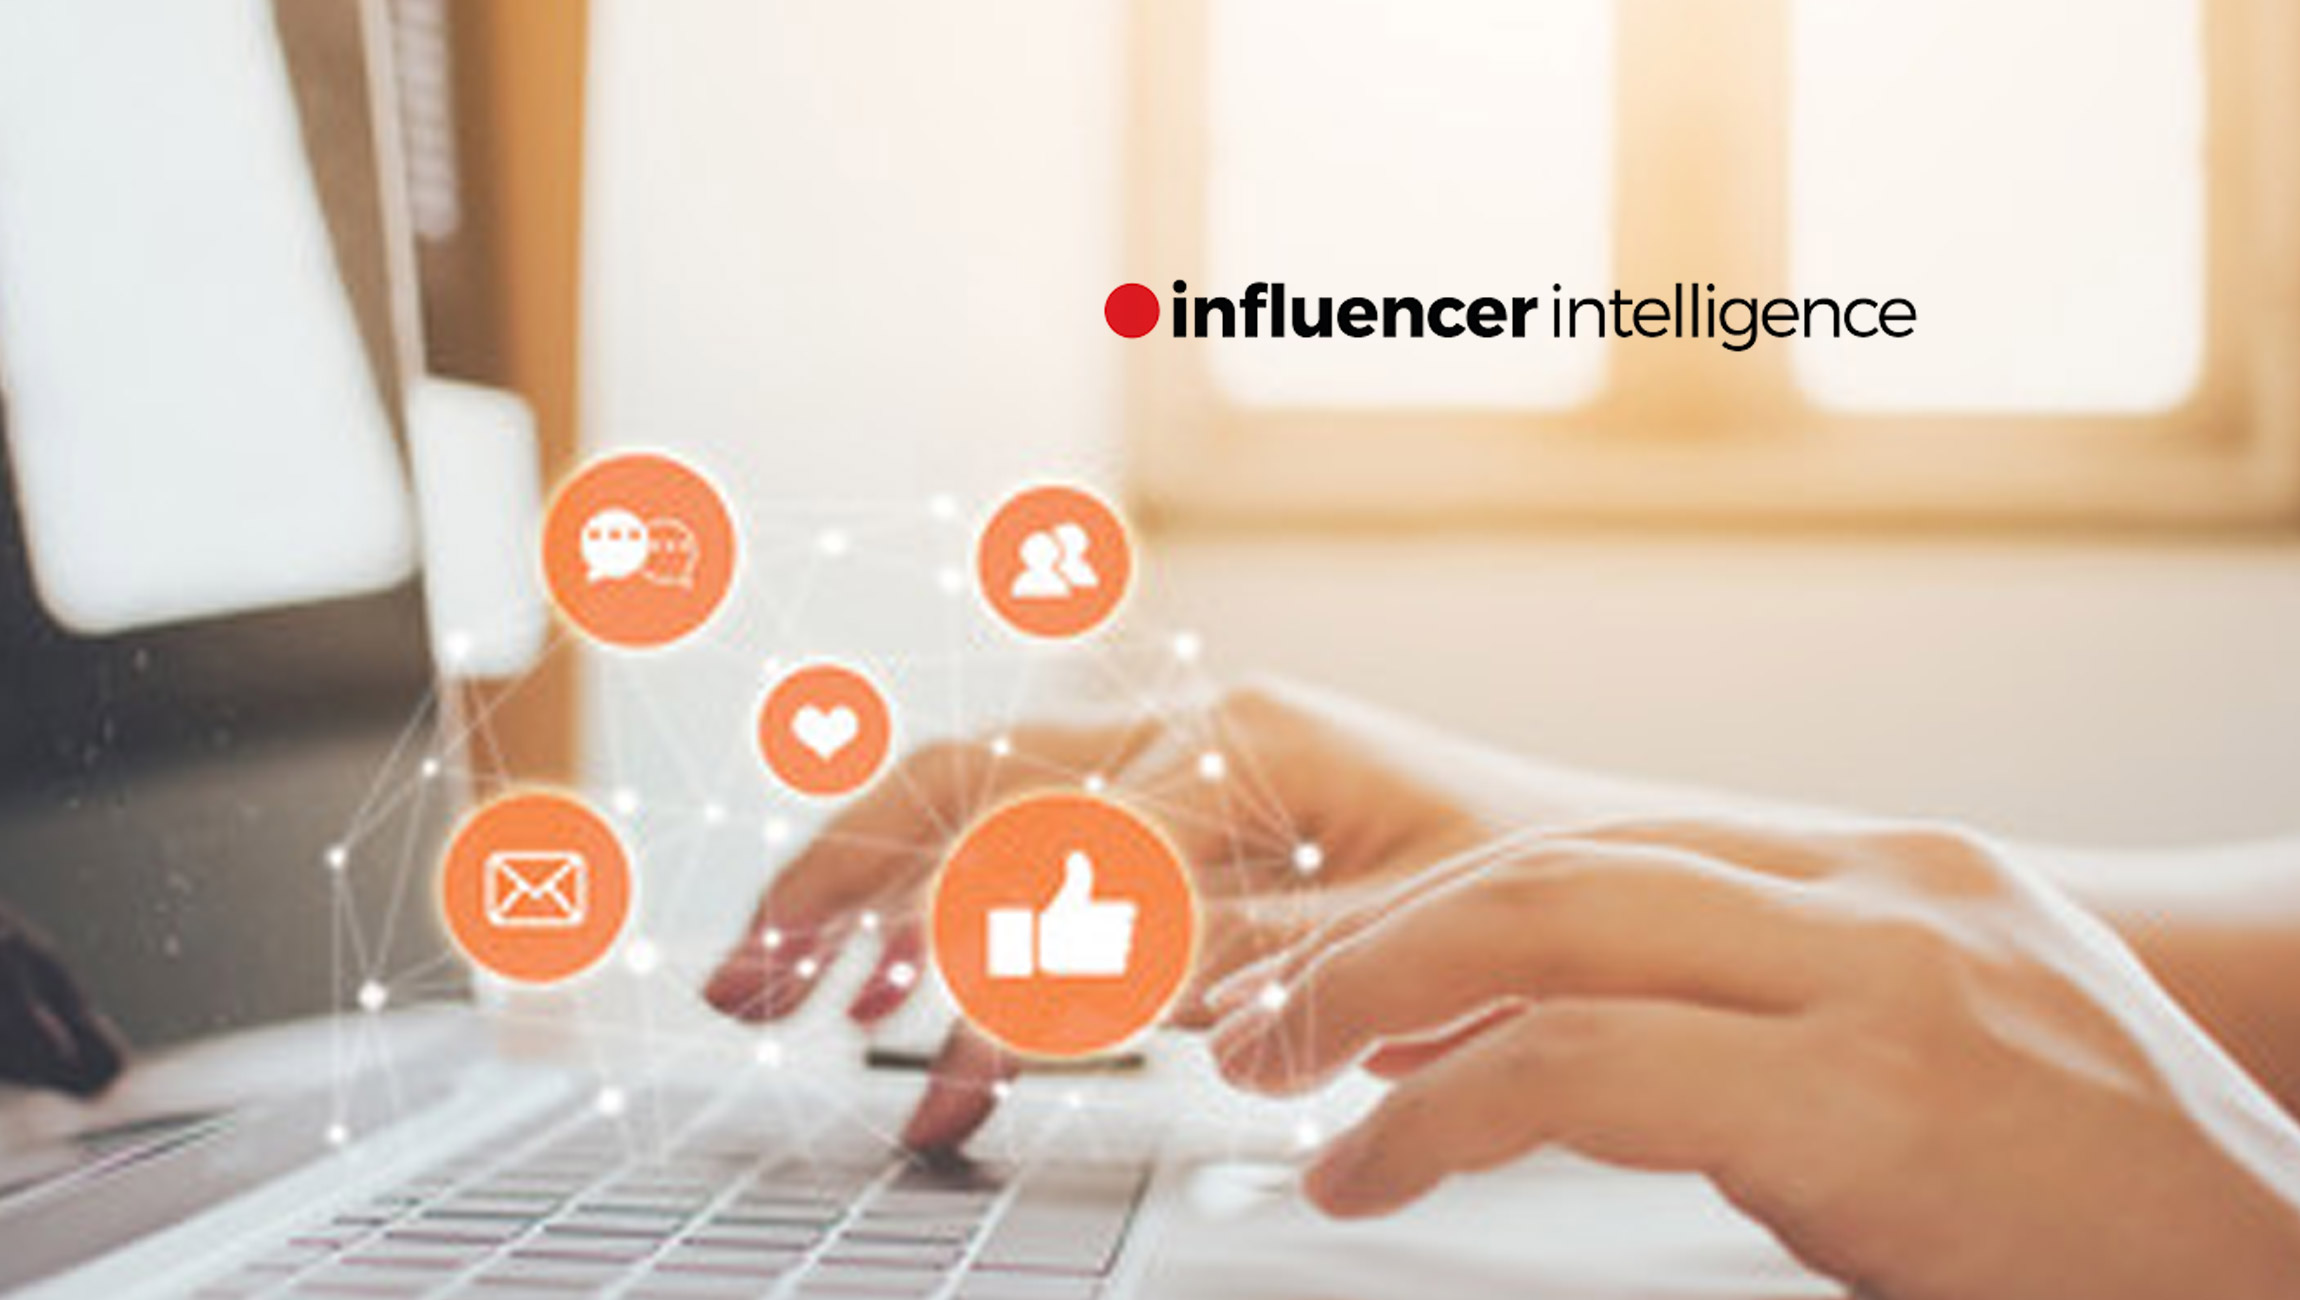 Social Commerce Set to Be Top Objective for Influencer Marketing